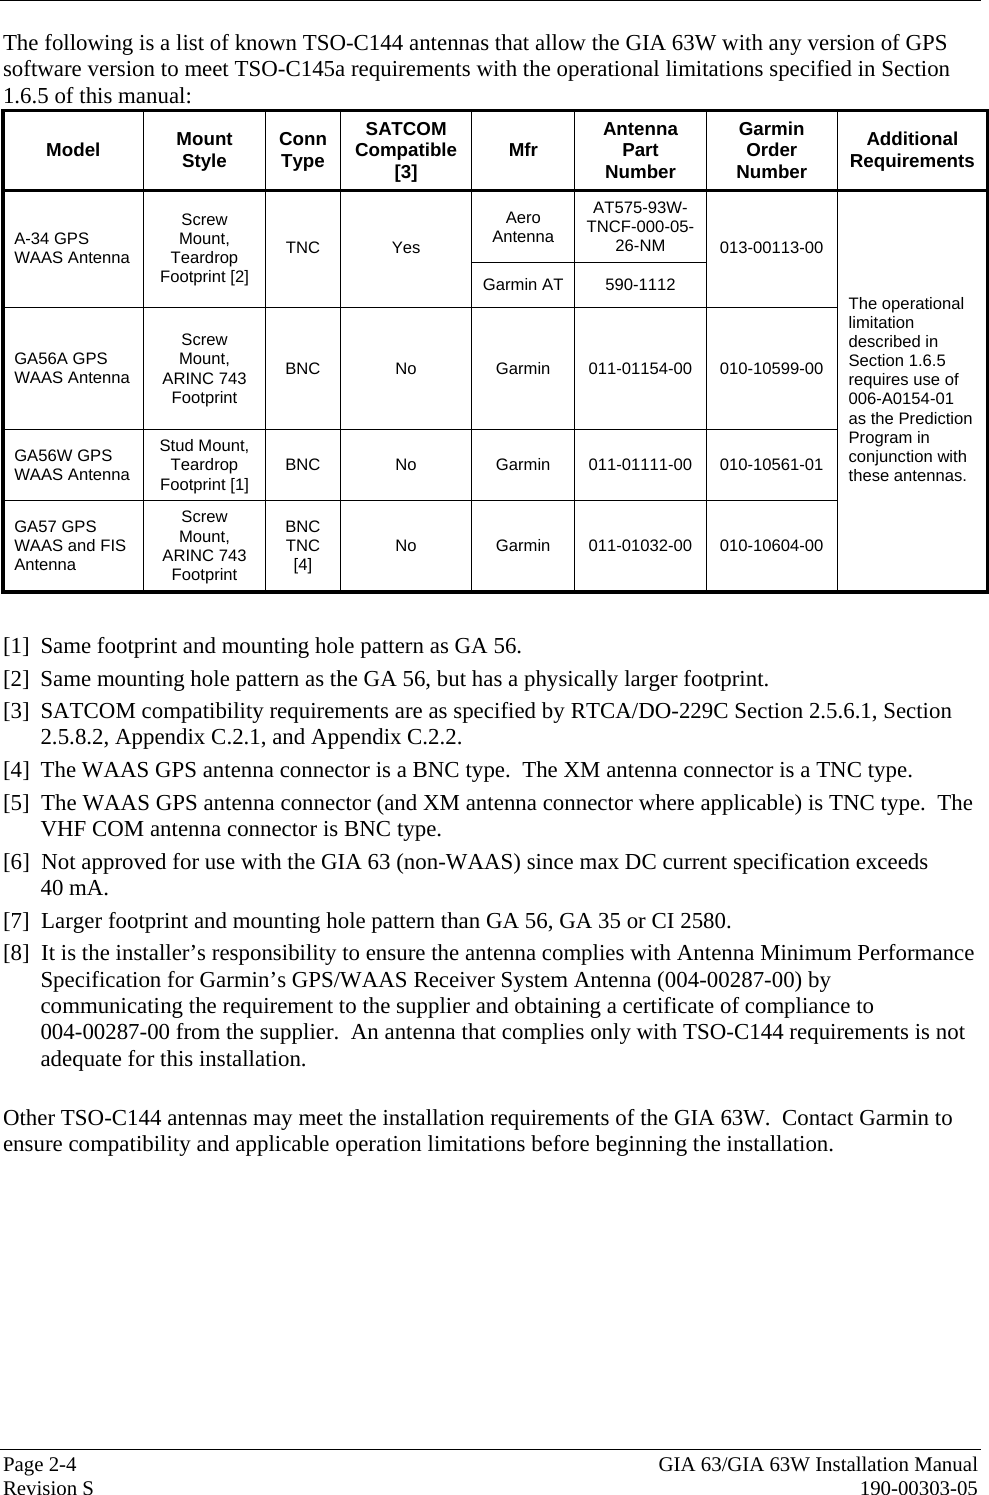  Page 2-4  GIA 63/GIA 63W Installation Manual Revision S  190-00303-05 The following is a list of known TSO-C144 antennas that allow the GIA 63W with any version of GPS software version to meet TSO-C145a requirements with the operational limitations specified in Section 1.6.5 of this manual: Model  Mount Style  Conn Type SATCOM Compatible [3]  Mfr  Antenna Part Number Garmin Order Number Additional Requirements Aero Antenna AT575-93W-TNCF-000-05-26-NM A-34 GPS WAAS Antenna Screw Mount, Teardrop Footprint [2] TNC Yes Garmin AT  590-1112 013-00113-00 GA56A GPS WAAS Antenna Screw Mount, ARINC 743 Footprint BNC No  Garmin 011-01154-00 010-10599-00 GA56W GPS WAAS Antenna Stud Mount, Teardrop Footprint [1]  BNC No  Garmin 011-01111-00 010-10561-01 GA57 GPS WAAS and FIS Antenna Screw Mount, ARINC 743 Footprint BNC TNC [4]  No Garmin 011-01032-00 010-10604-00 The operational limitation described in Section 1.6.5 requires use of 006-A0154-01 as the Prediction Program in conjunction with these antennas.  [1]  Same footprint and mounting hole pattern as GA 56. [2]  Same mounting hole pattern as the GA 56, but has a physically larger footprint. [3]  SATCOM compatibility requirements are as specified by RTCA/DO-229C Section 2.5.6.1, Section 2.5.8.2, Appendix C.2.1, and Appendix C.2.2. [4]  The WAAS GPS antenna connector is a BNC type.  The XM antenna connector is a TNC type. [5]  The WAAS GPS antenna connector (and XM antenna connector where applicable) is TNC type.  The VHF COM antenna connector is BNC type. [6]  Not approved for use with the GIA 63 (non-WAAS) since max DC current specification exceeds  40 mA. [7]  Larger footprint and mounting hole pattern than GA 56, GA 35 or CI 2580. [8]  It is the installer’s responsibility to ensure the antenna complies with Antenna Minimum Performance Specification for Garmin’s GPS/WAAS Receiver System Antenna (004-00287-00) by communicating the requirement to the supplier and obtaining a certificate of compliance to  004-00287-00 from the supplier.  An antenna that complies only with TSO-C144 requirements is not adequate for this installation.  Other TSO-C144 antennas may meet the installation requirements of the GIA 63W.  Contact Garmin to  ensure compatibility and applicable operation limitations before beginning the installation. 